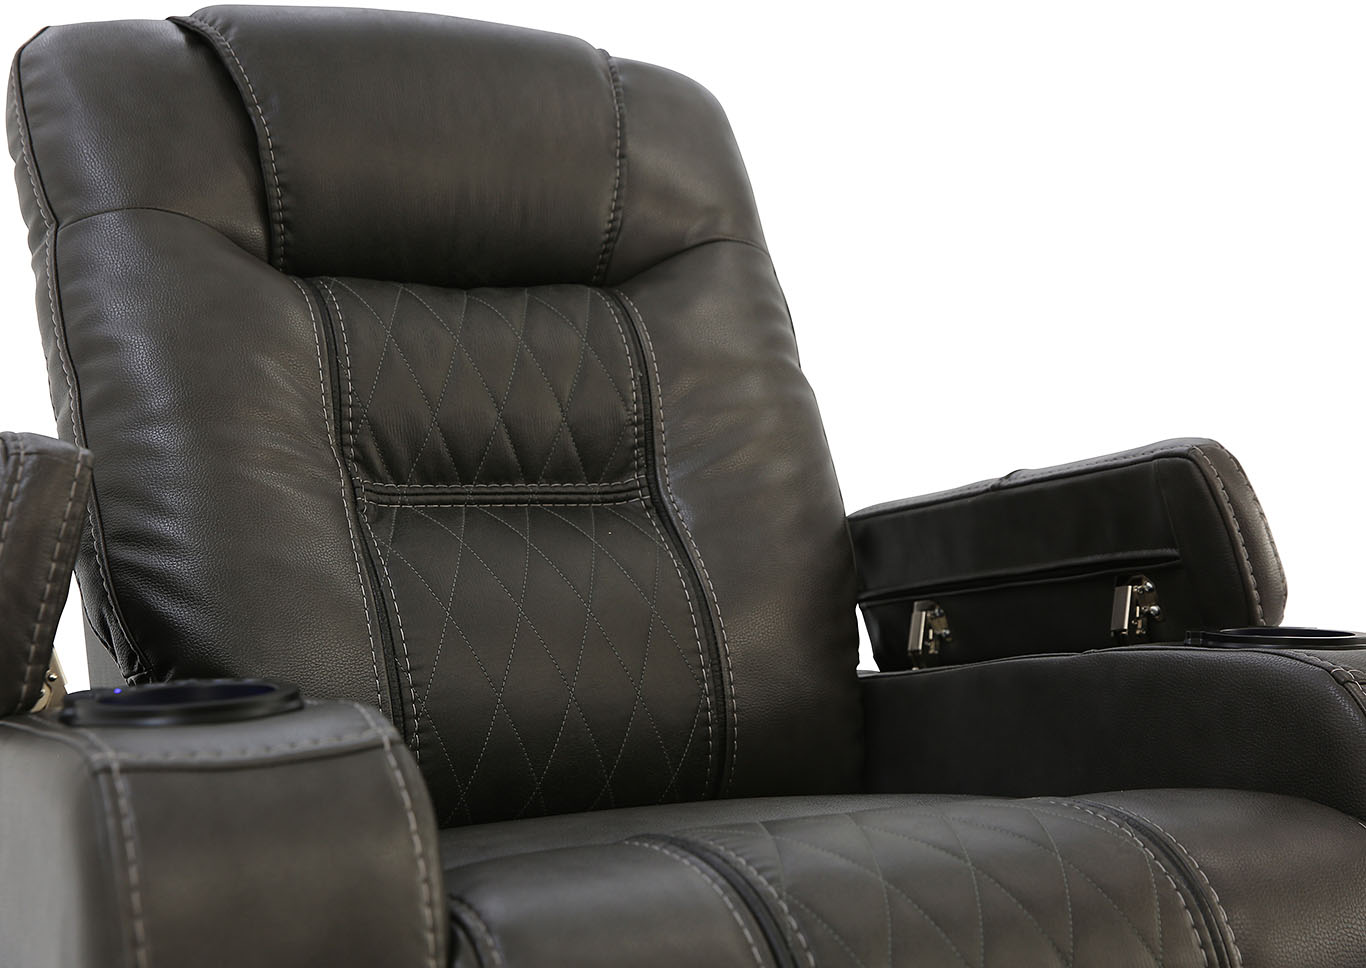 COMPOSER GRAY POWER RECLINER,ASHLEY FURNITURE INC.